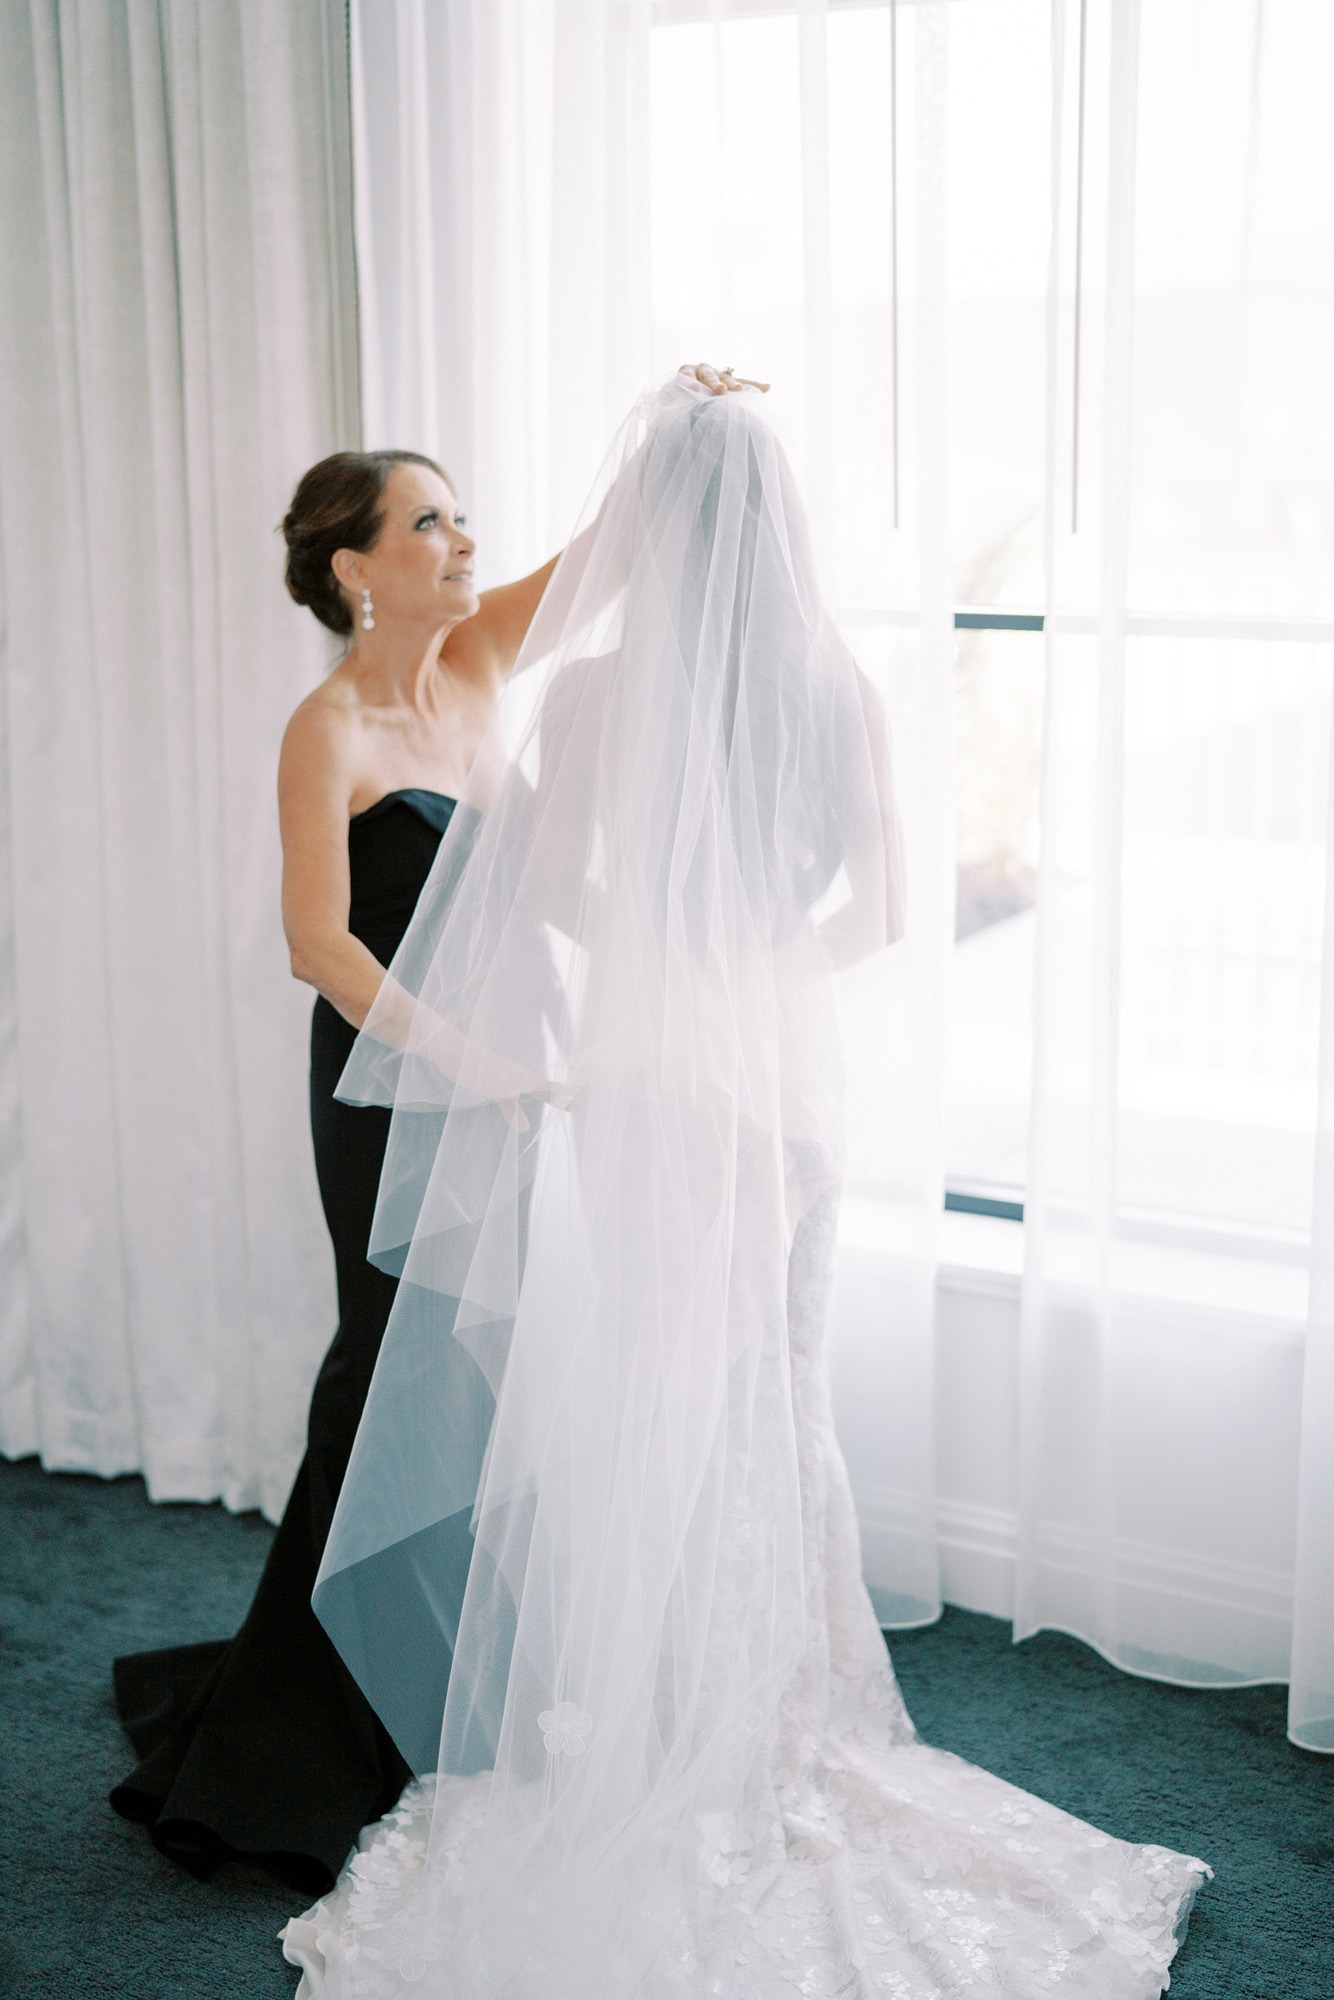 Tips for Pairing a Veil with Your Wedding Dress